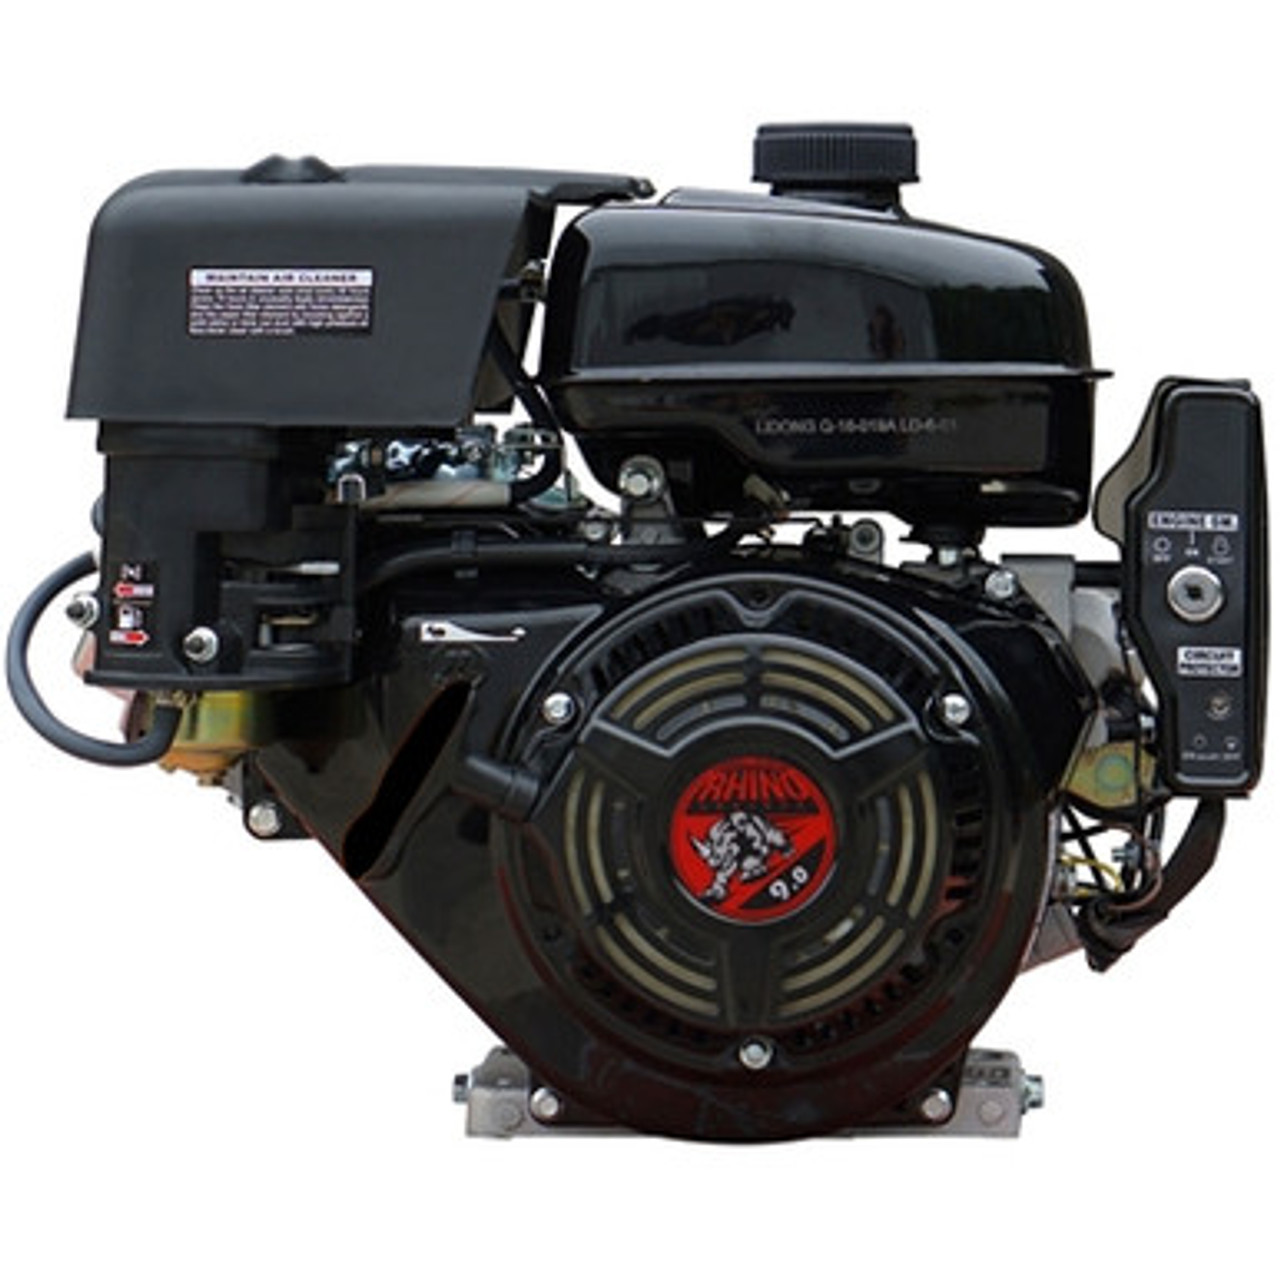 9 HP 6:1 Gear Reduction Gas Engine With Electric Start 9HP 1 Shaft